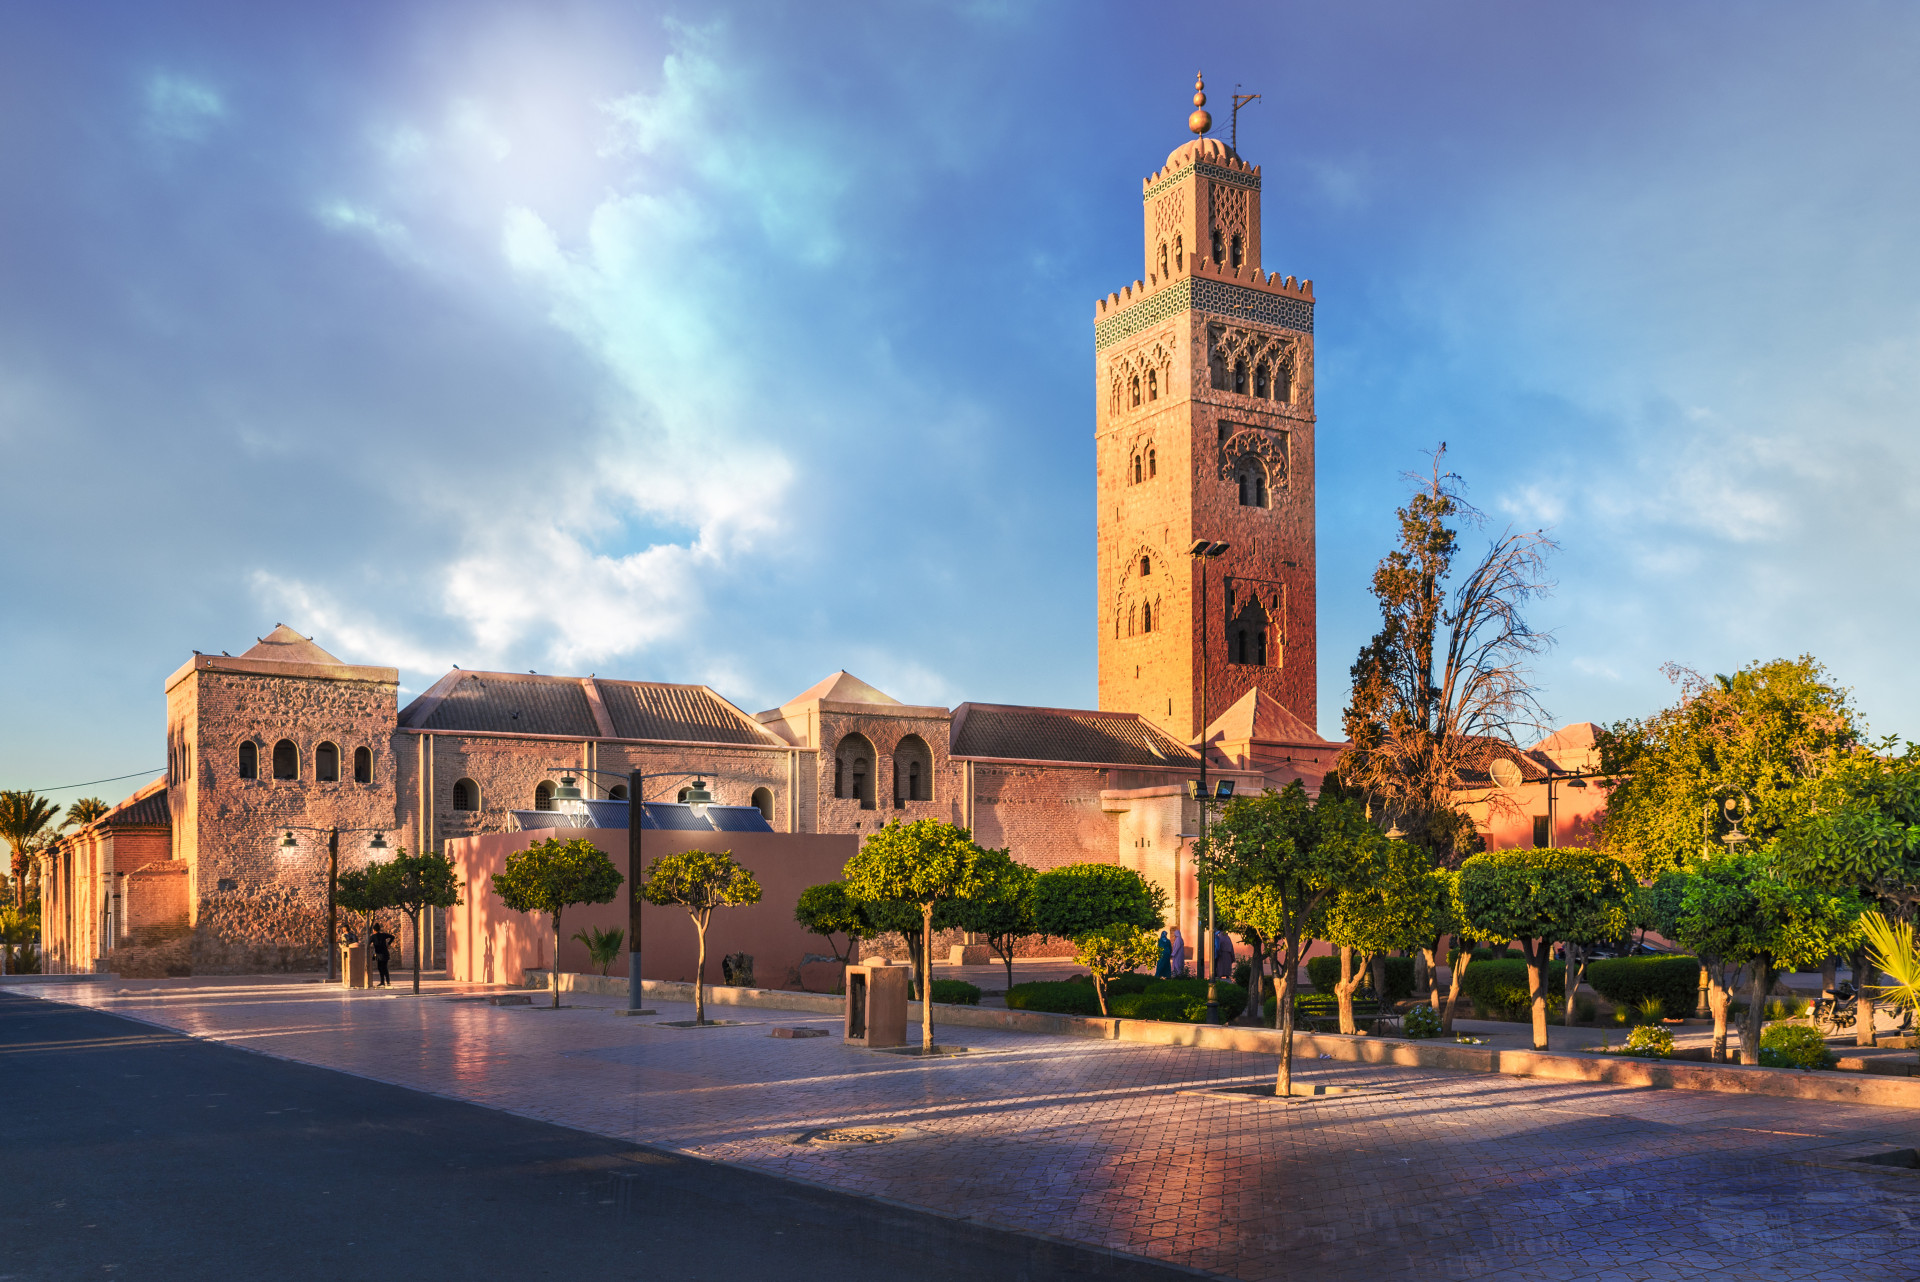 In this Moroccan city, it's impossible not to love the Medina of Marrakesh, the center of the city.<p><a href="https://www.msn.com/en-sg/community/channel/vid-7xx8mnucu55yw63we9va2gwr7uihbxwc68fxqp25x6tg4ftibpra?cvid=94631541bc0f4f89bfd59158d696ad7e">Follow us and access great exclusive content every day</a></p>